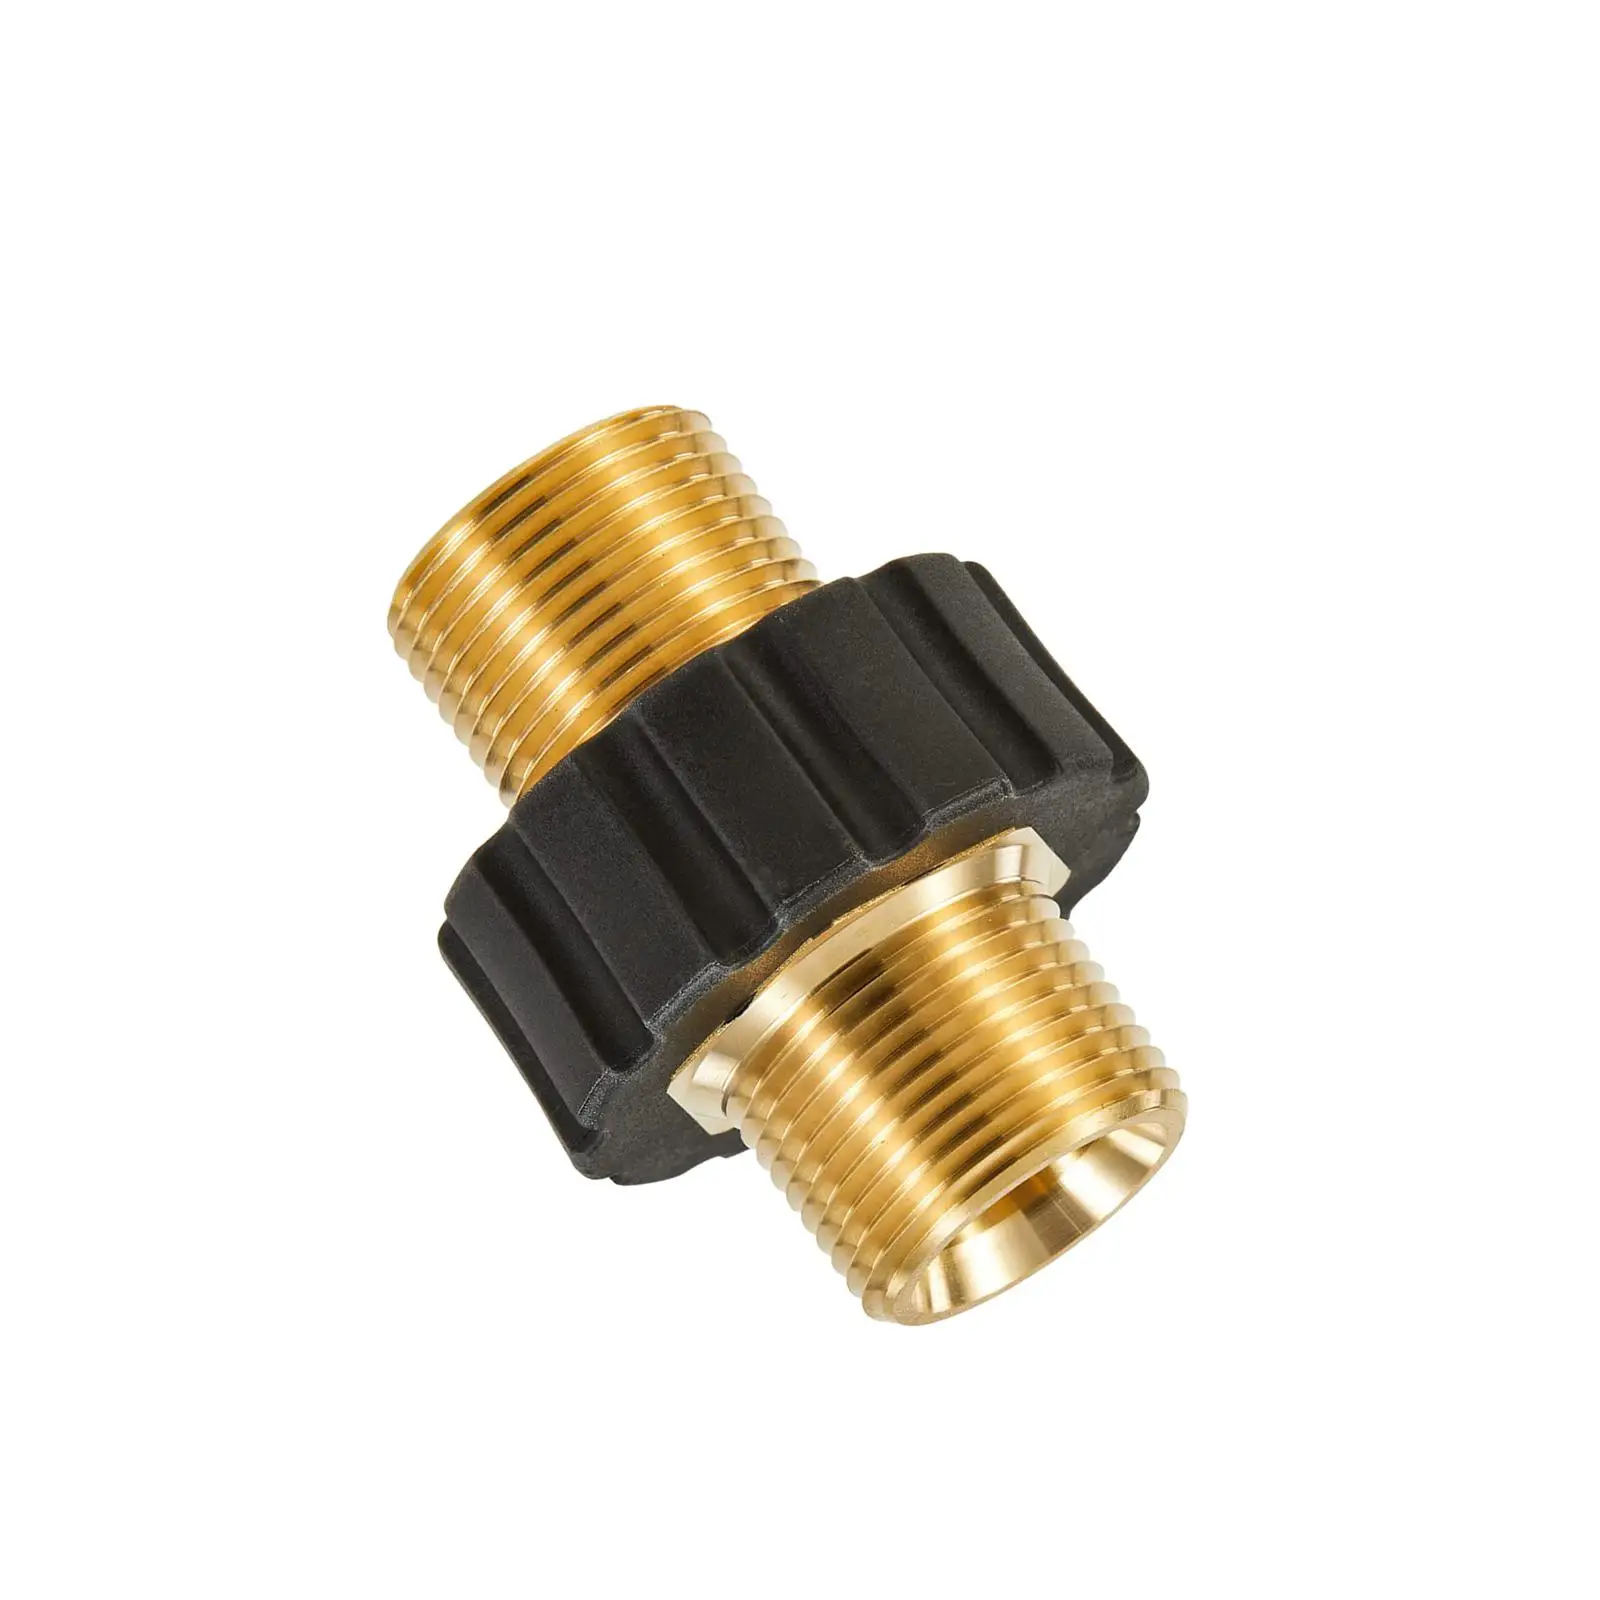 M22 14mm Male High Pressure Washer Adapter, Accessories Garden Hose Fitting 5000